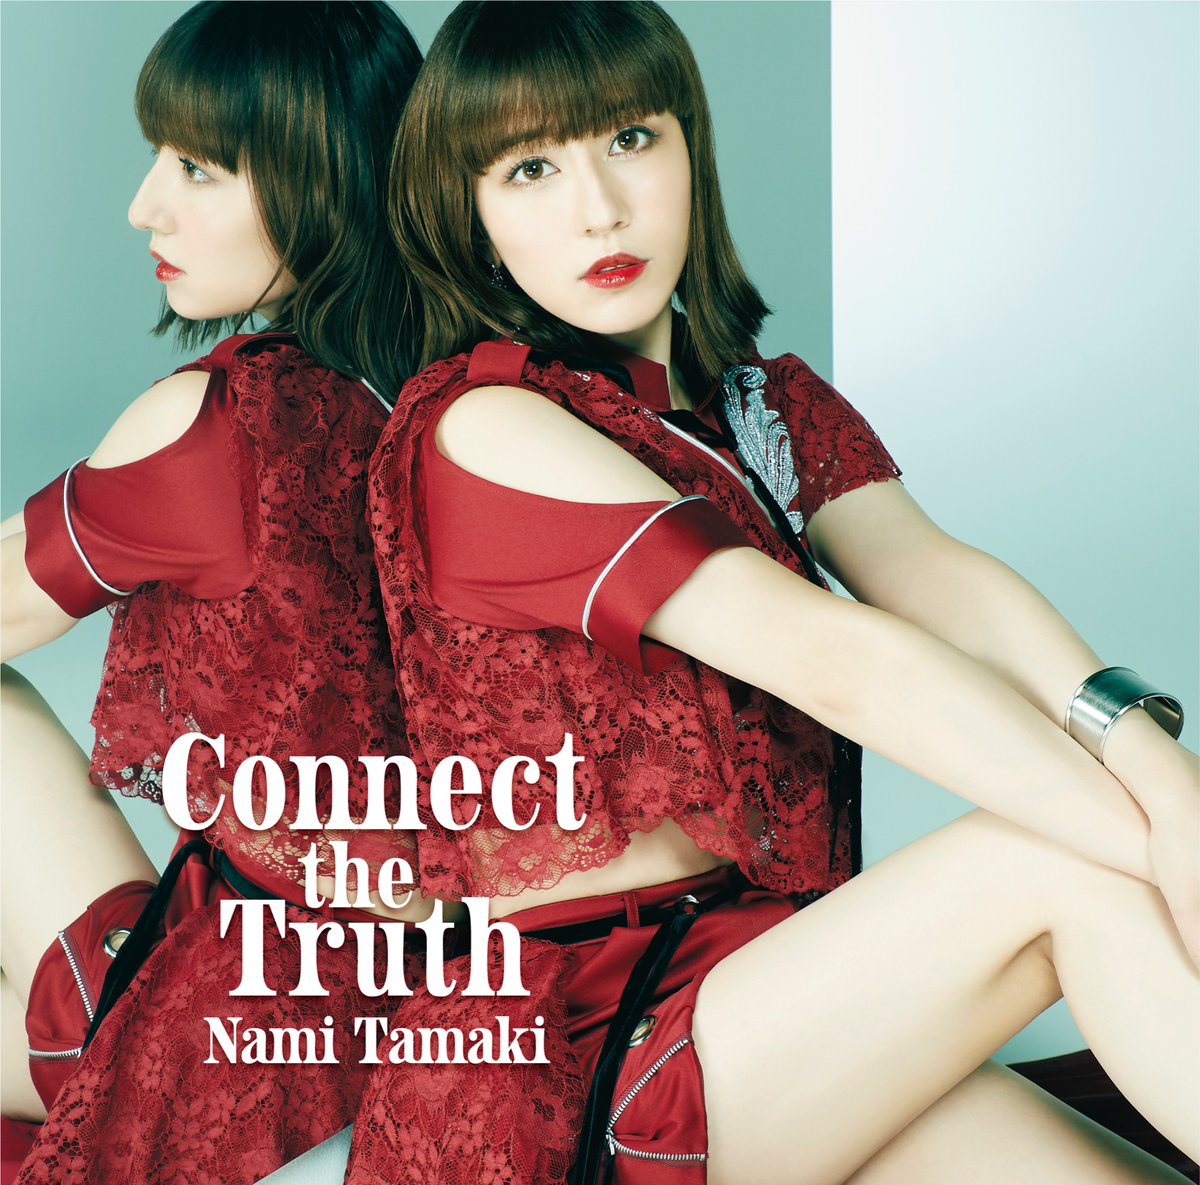 Cover art for『Nami Tamaki - Connect the Truth』from the release『Connect the Truth』